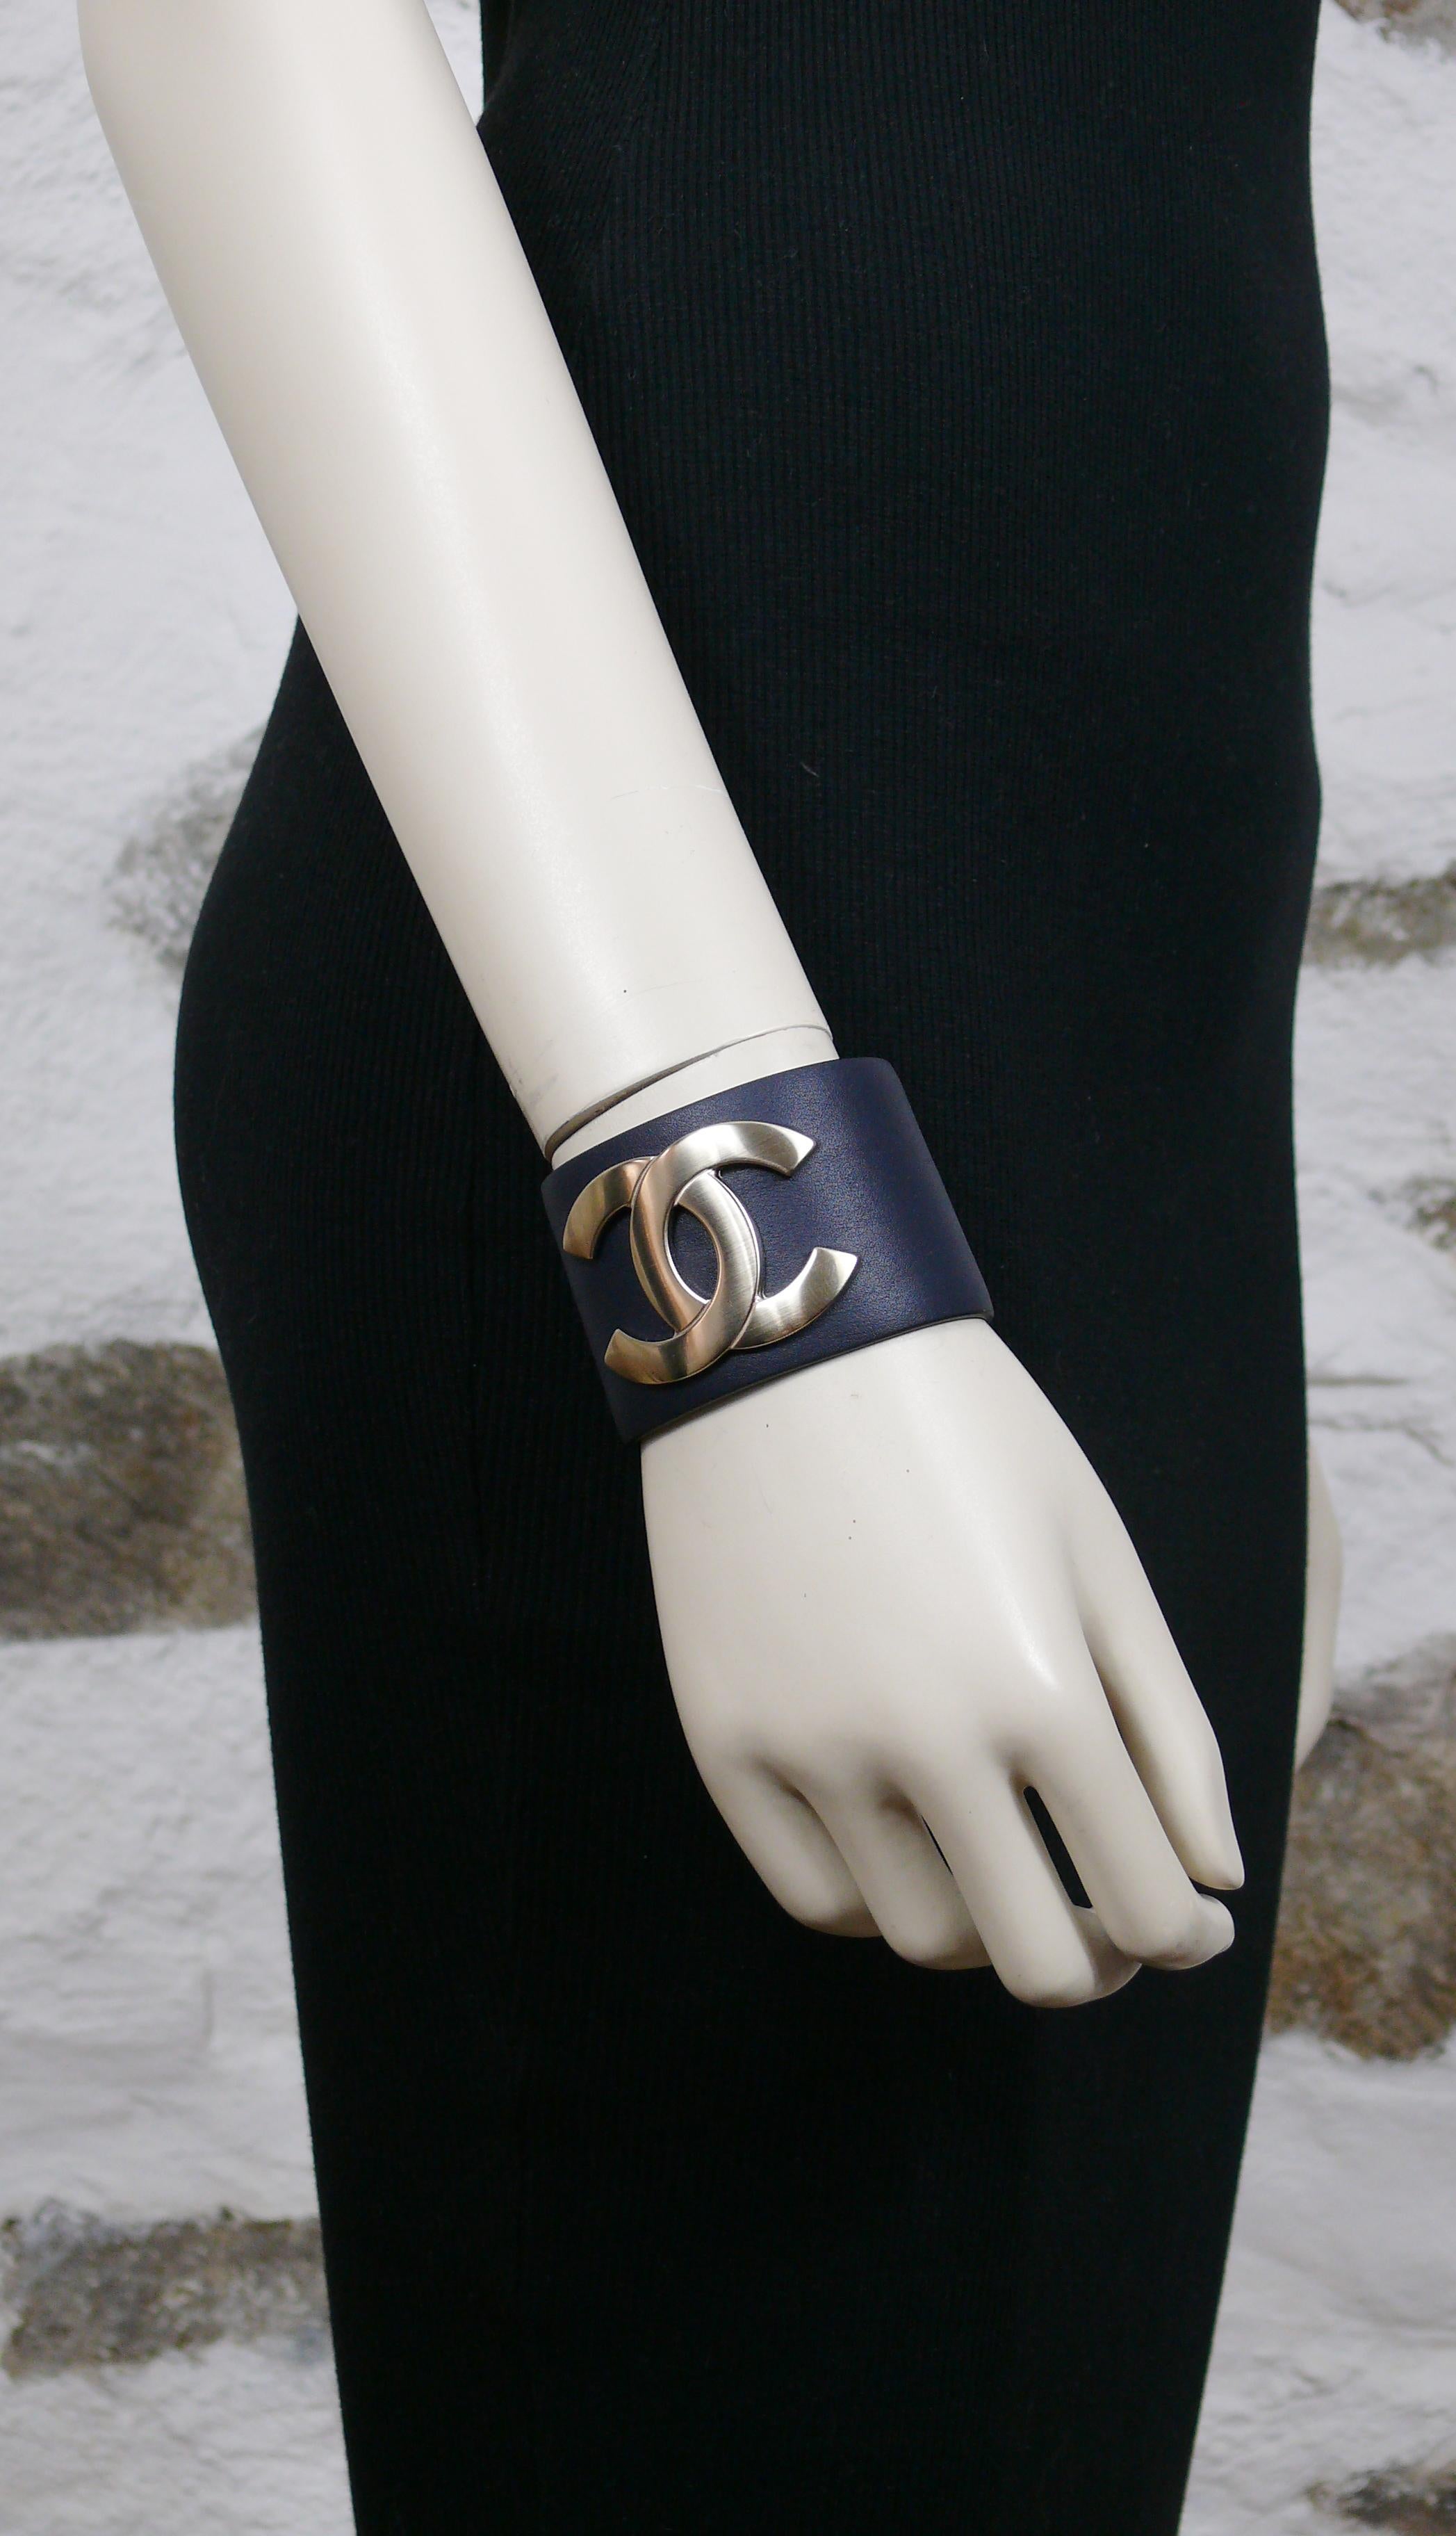 CHANEL dark navy blue wide leather cuff bracelet featuring a pale gold toned CC logo at the centre.

Exclusive Edition December 2017.

Laser mark CHANEL G18 C MADE IN ITALY.
Embossed on the leather EXCLUSIVE EDITION DECEMBER 2017.

Size mark reads :